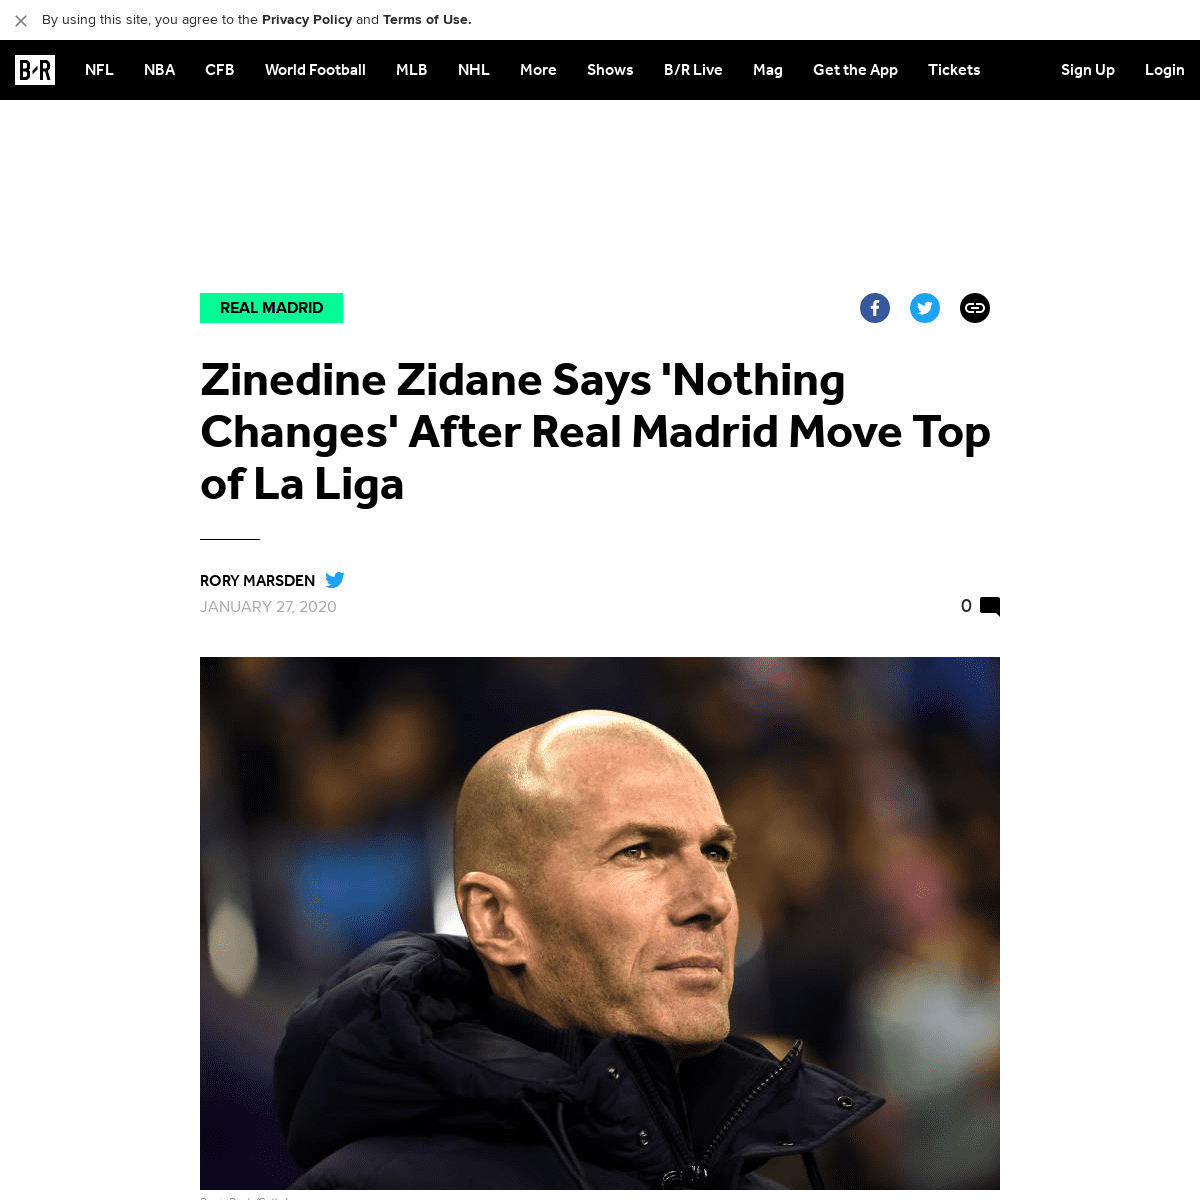 A complete backup of bleacherreport.com/articles/2873307-zinedine-zidane-says-nothing-changes-after-real-madrid-move-top-of-la-l